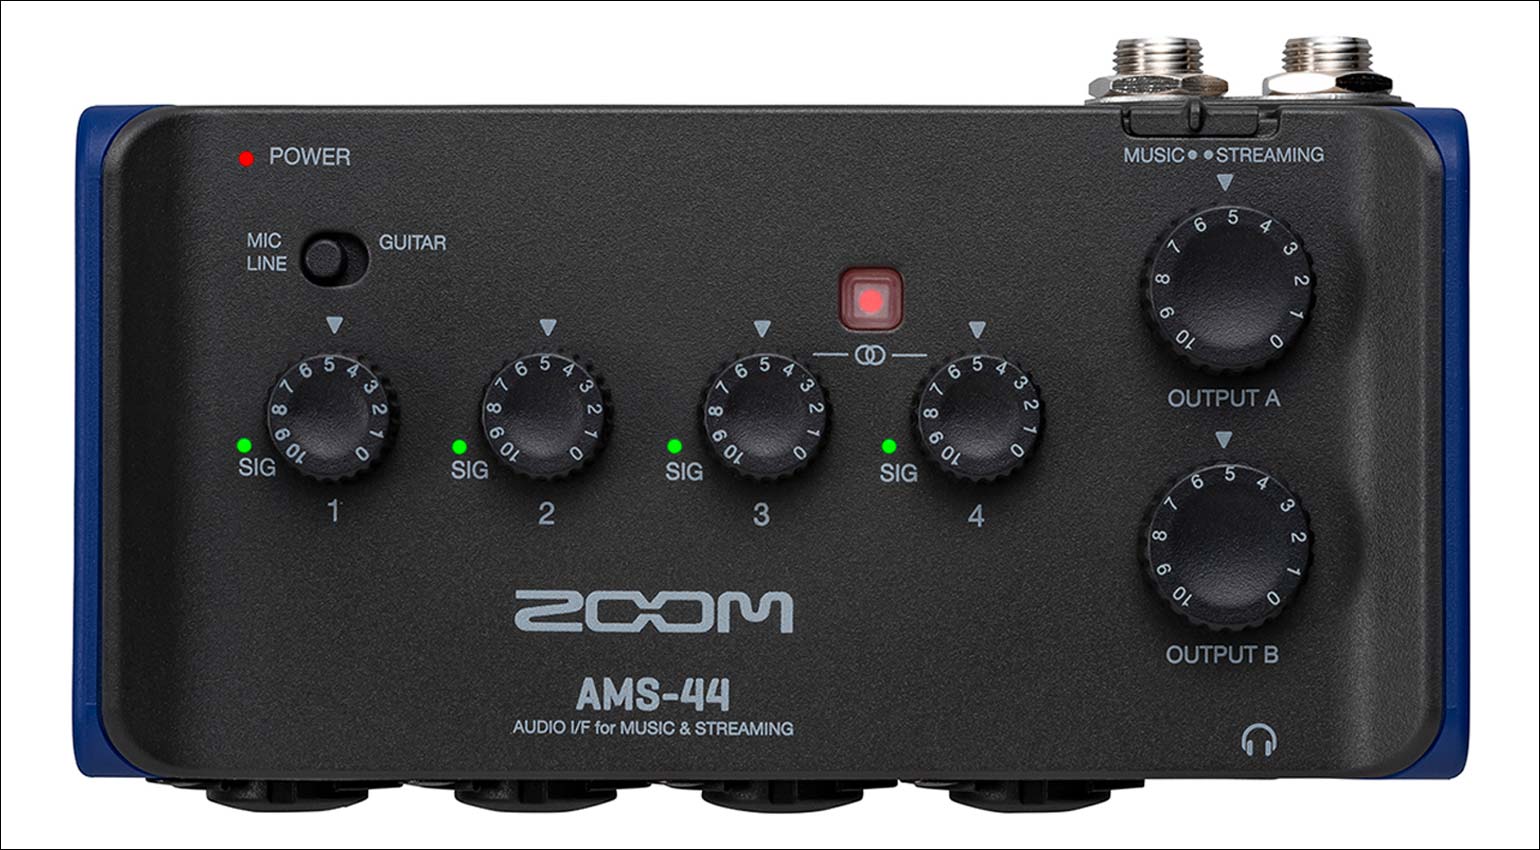 ZOOM AMS-44 top view